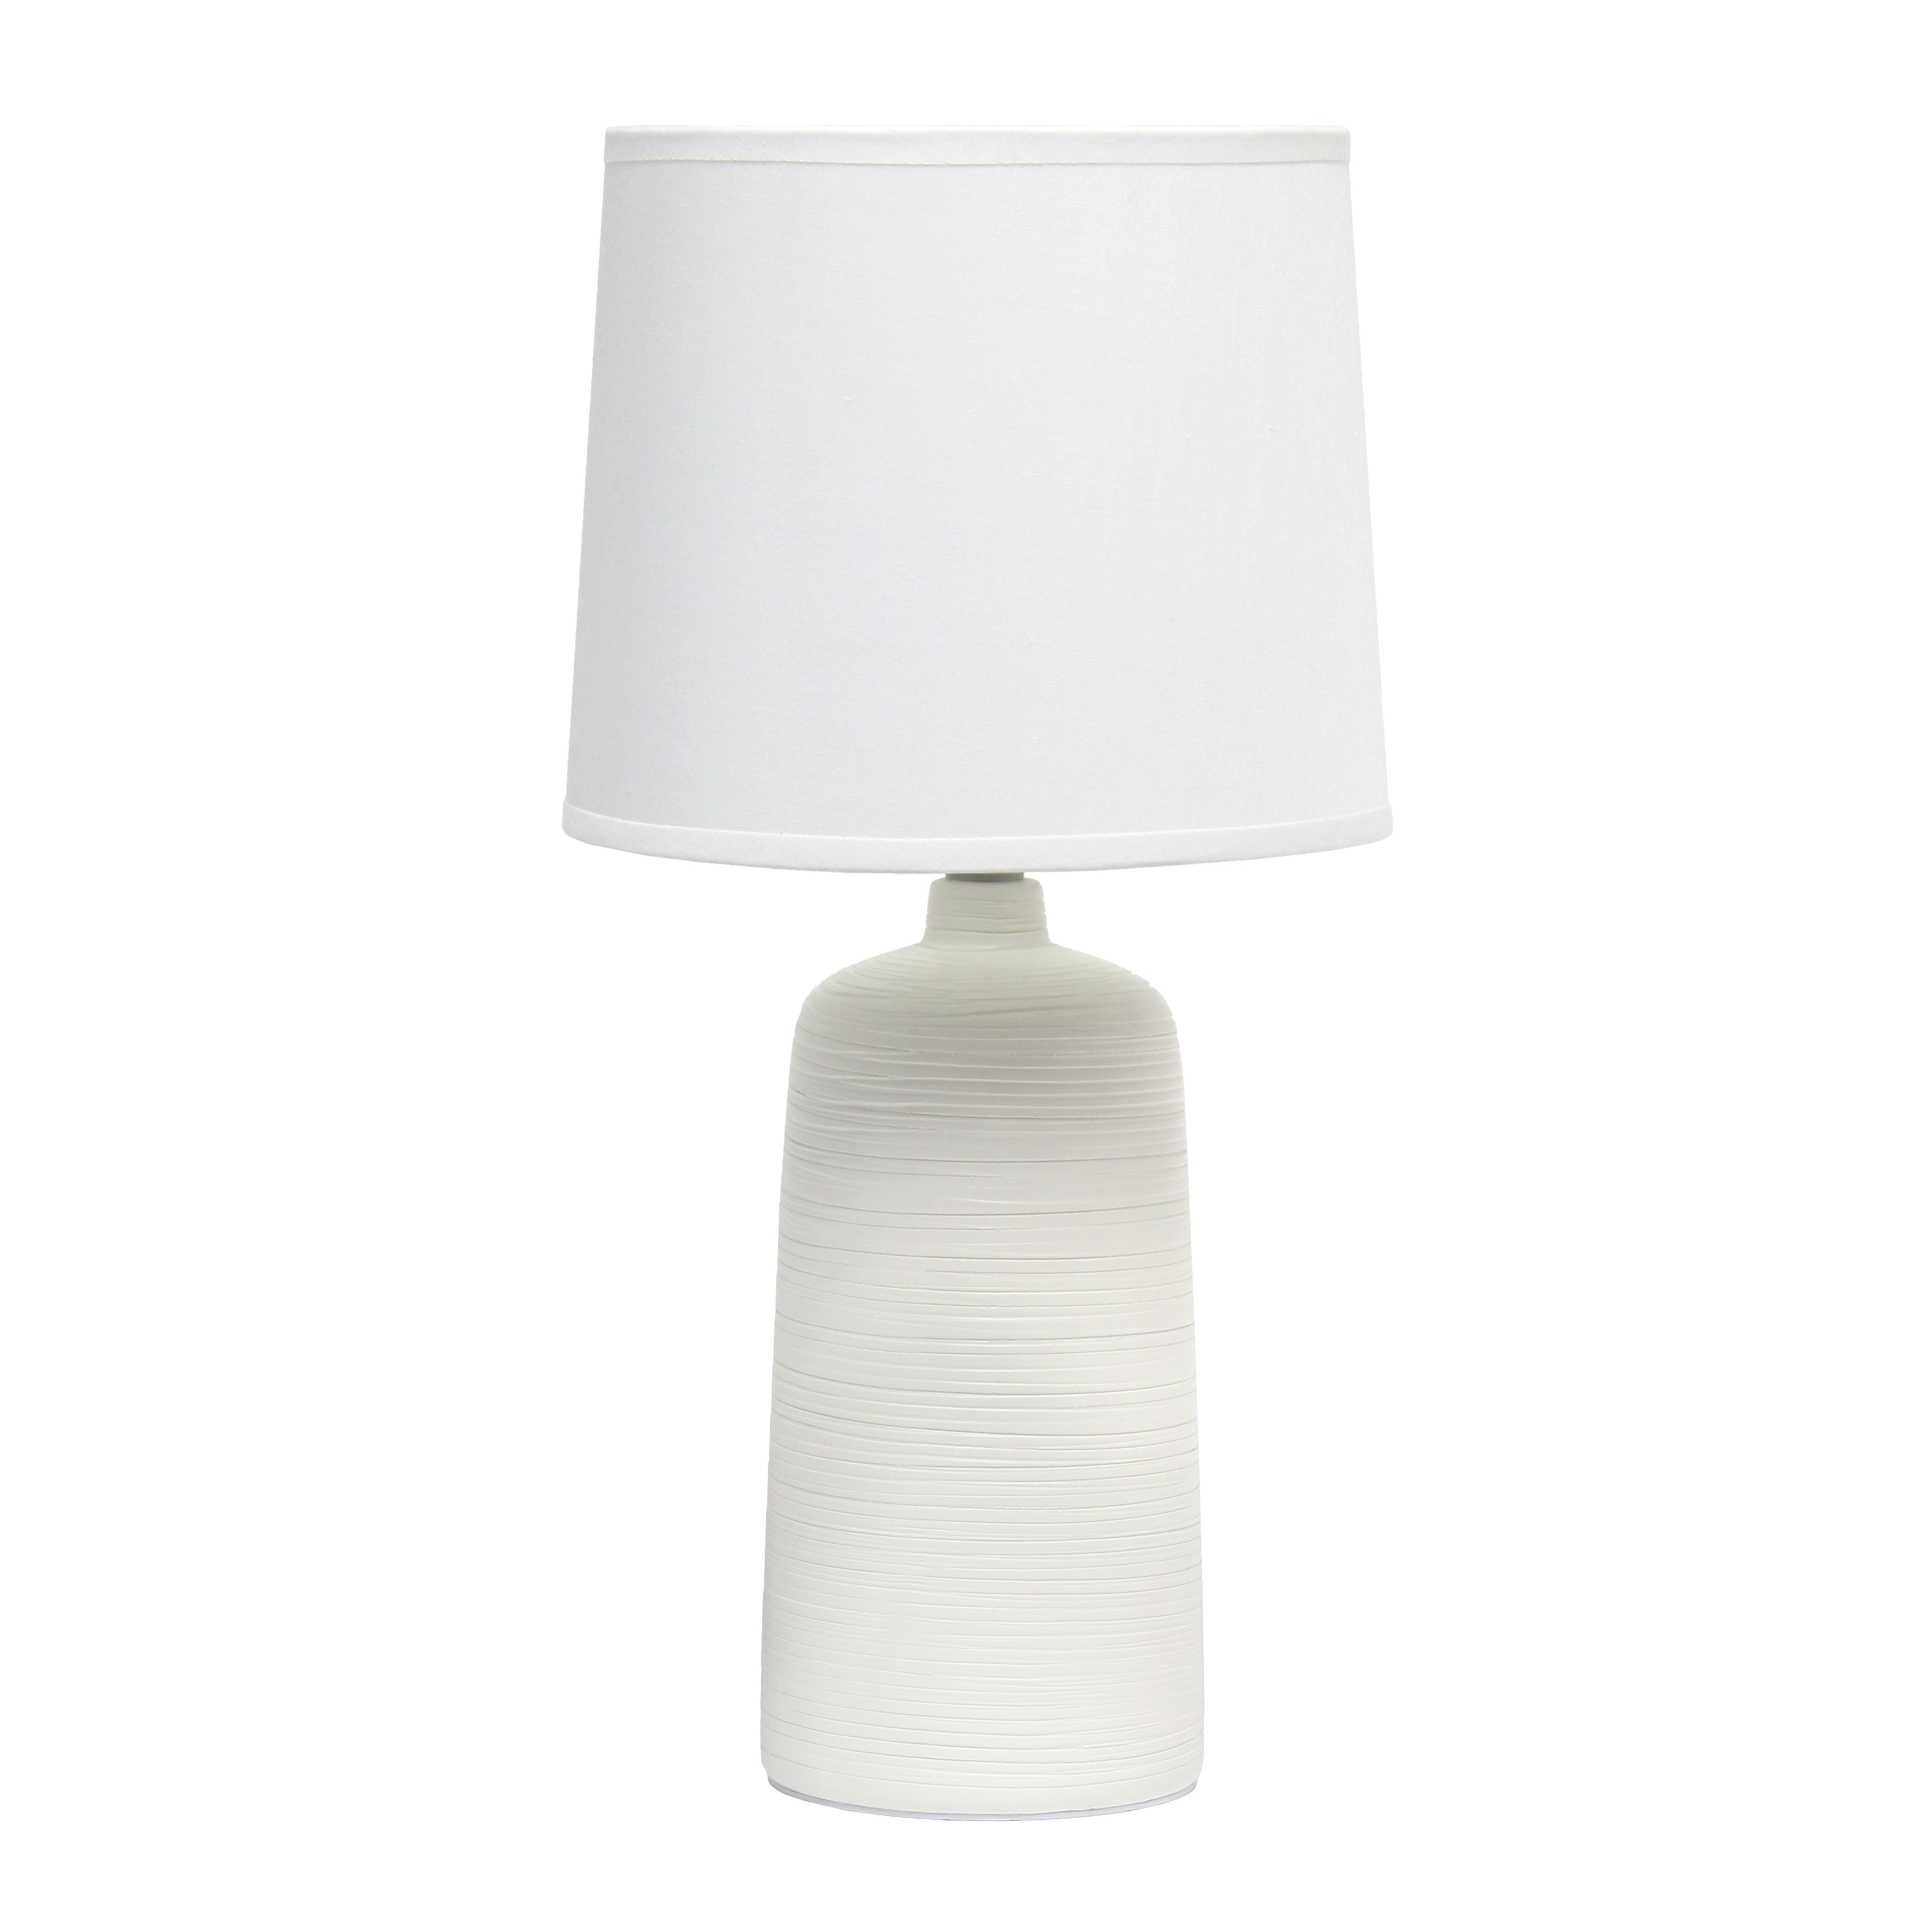 Simple Designs Textured Linear Ceramic Table Lamp, Off White